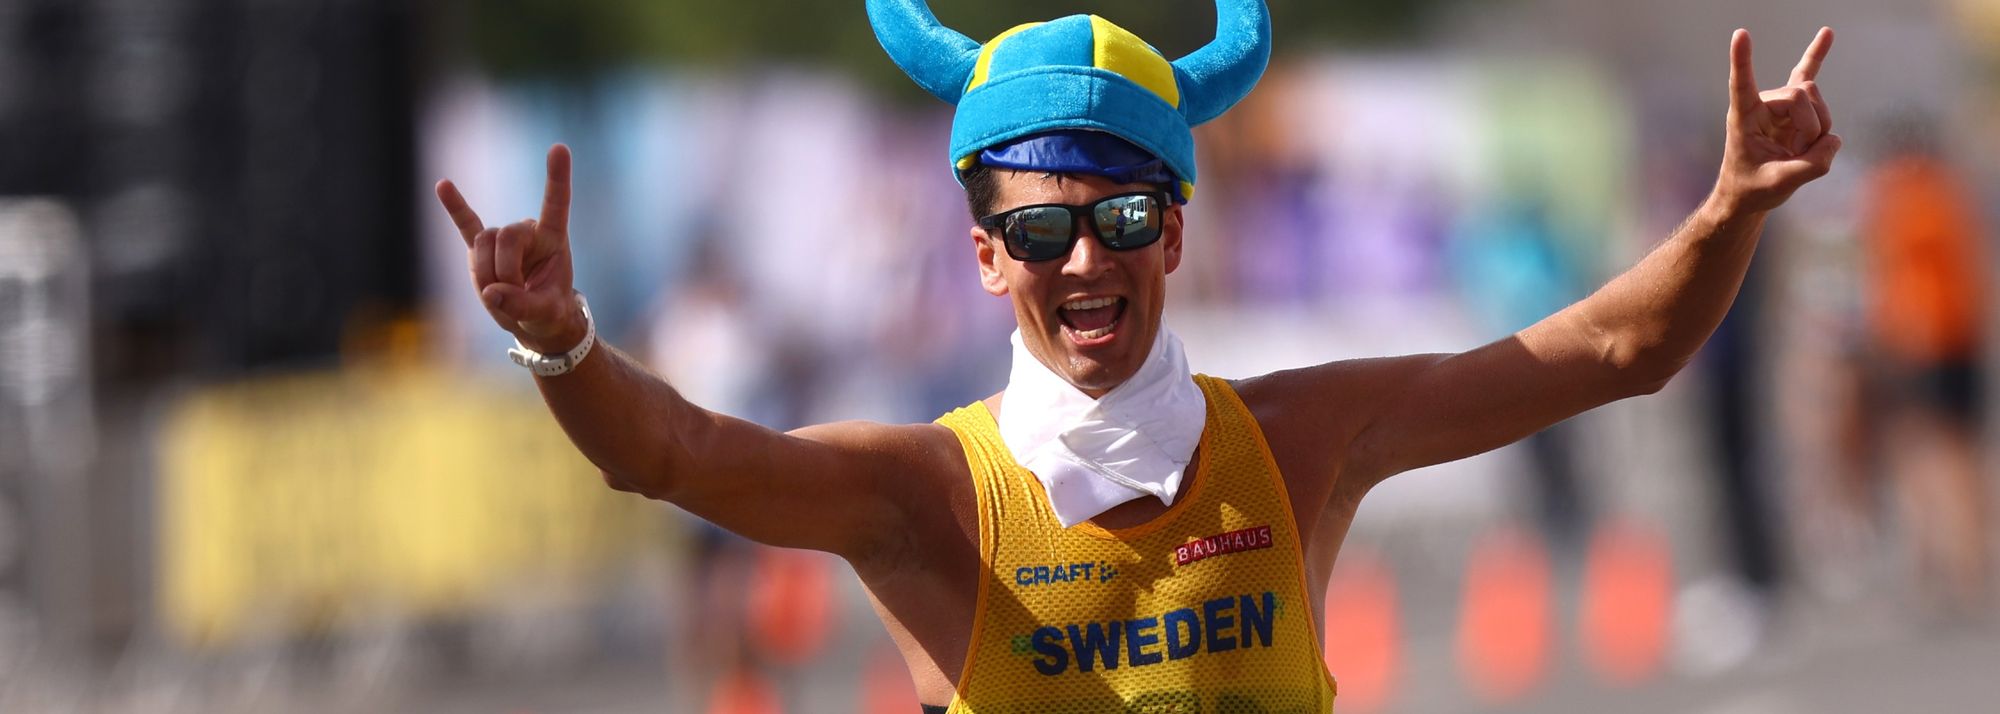 Donning a novelty Swedish Viking hat in the final few hundred metres of a race has become something of a trademark for Swedish race walker Perseus Karlstrom.